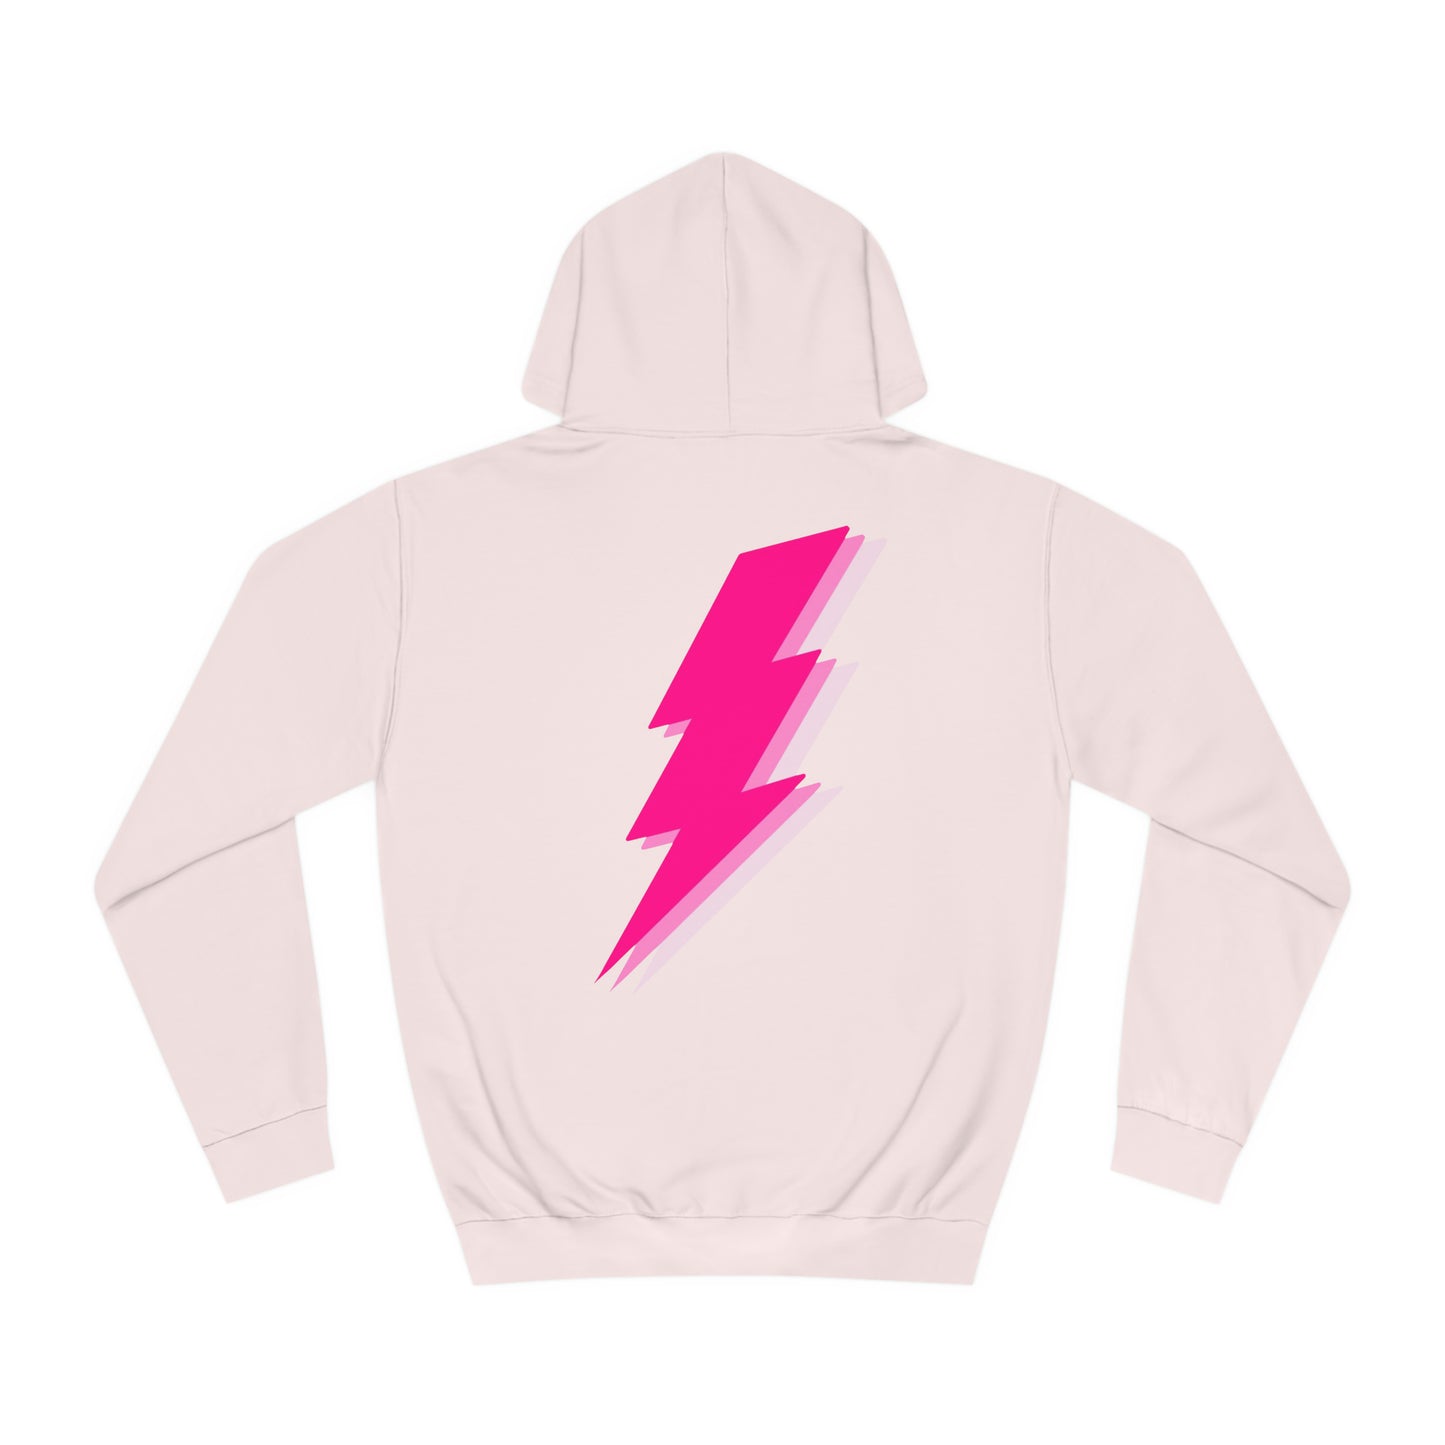 Lightening Bolt Design Hoodie: Unleash Your Style with Comfort and Quality